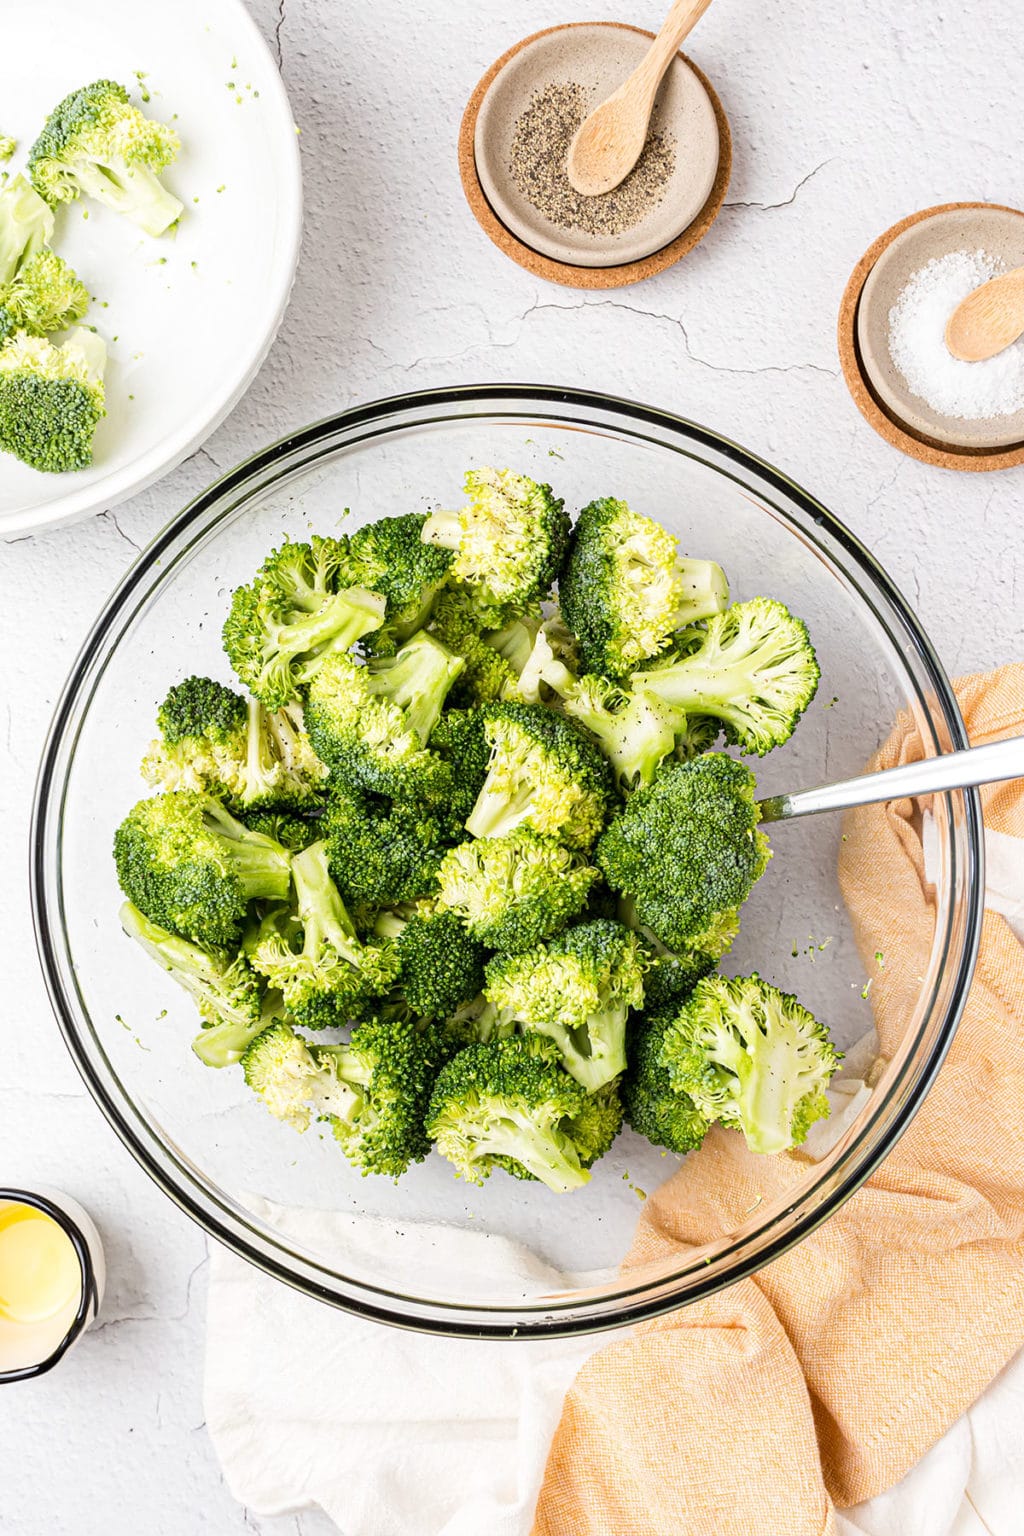 Parmesan Oven Roasted Broccoli, A Favorite Side Dish - TidyMom®